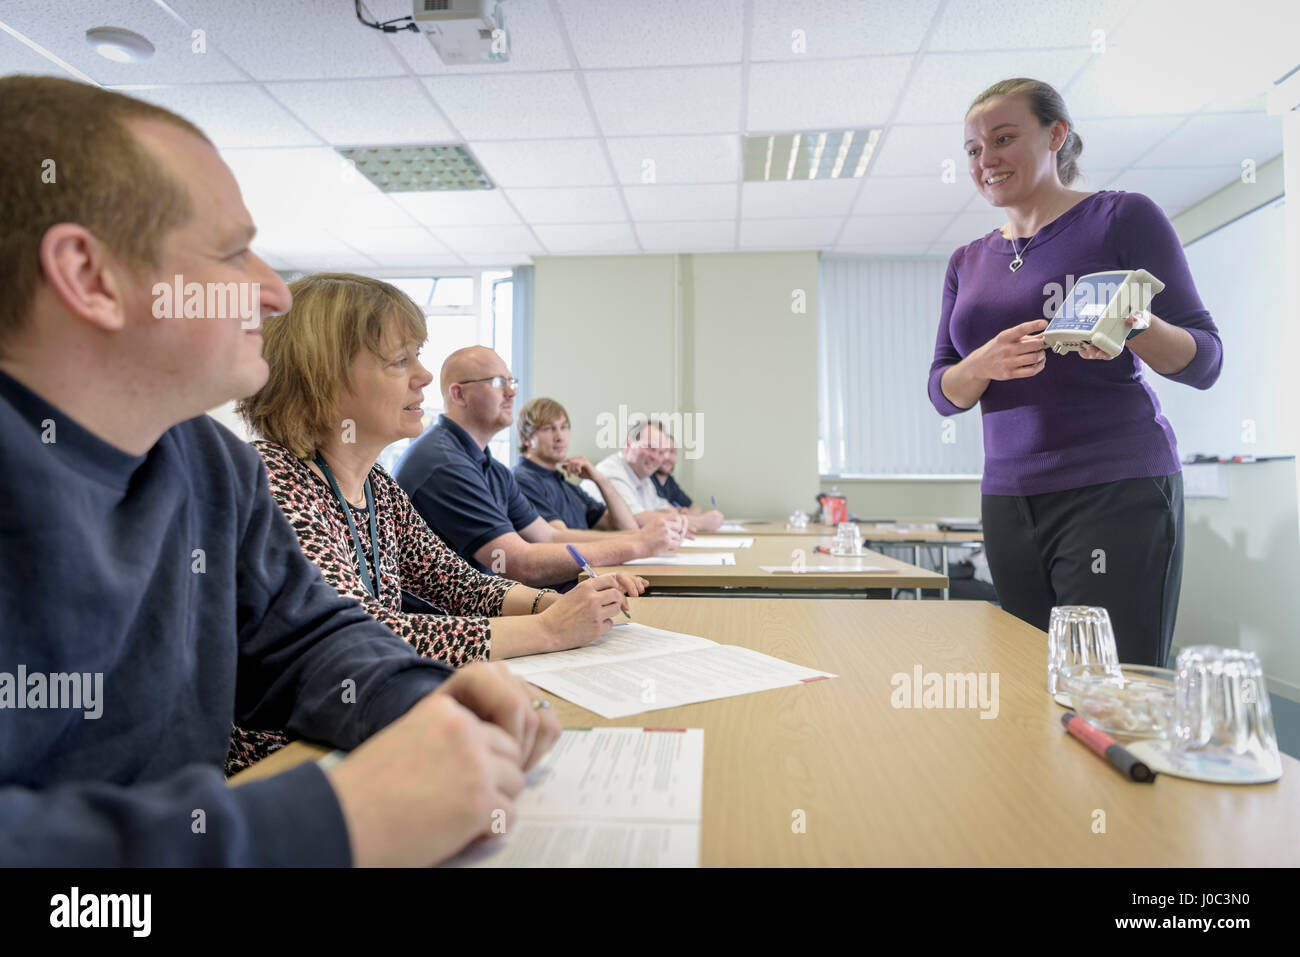 Seminar leader instructing staff members about electrical components Stock Photo